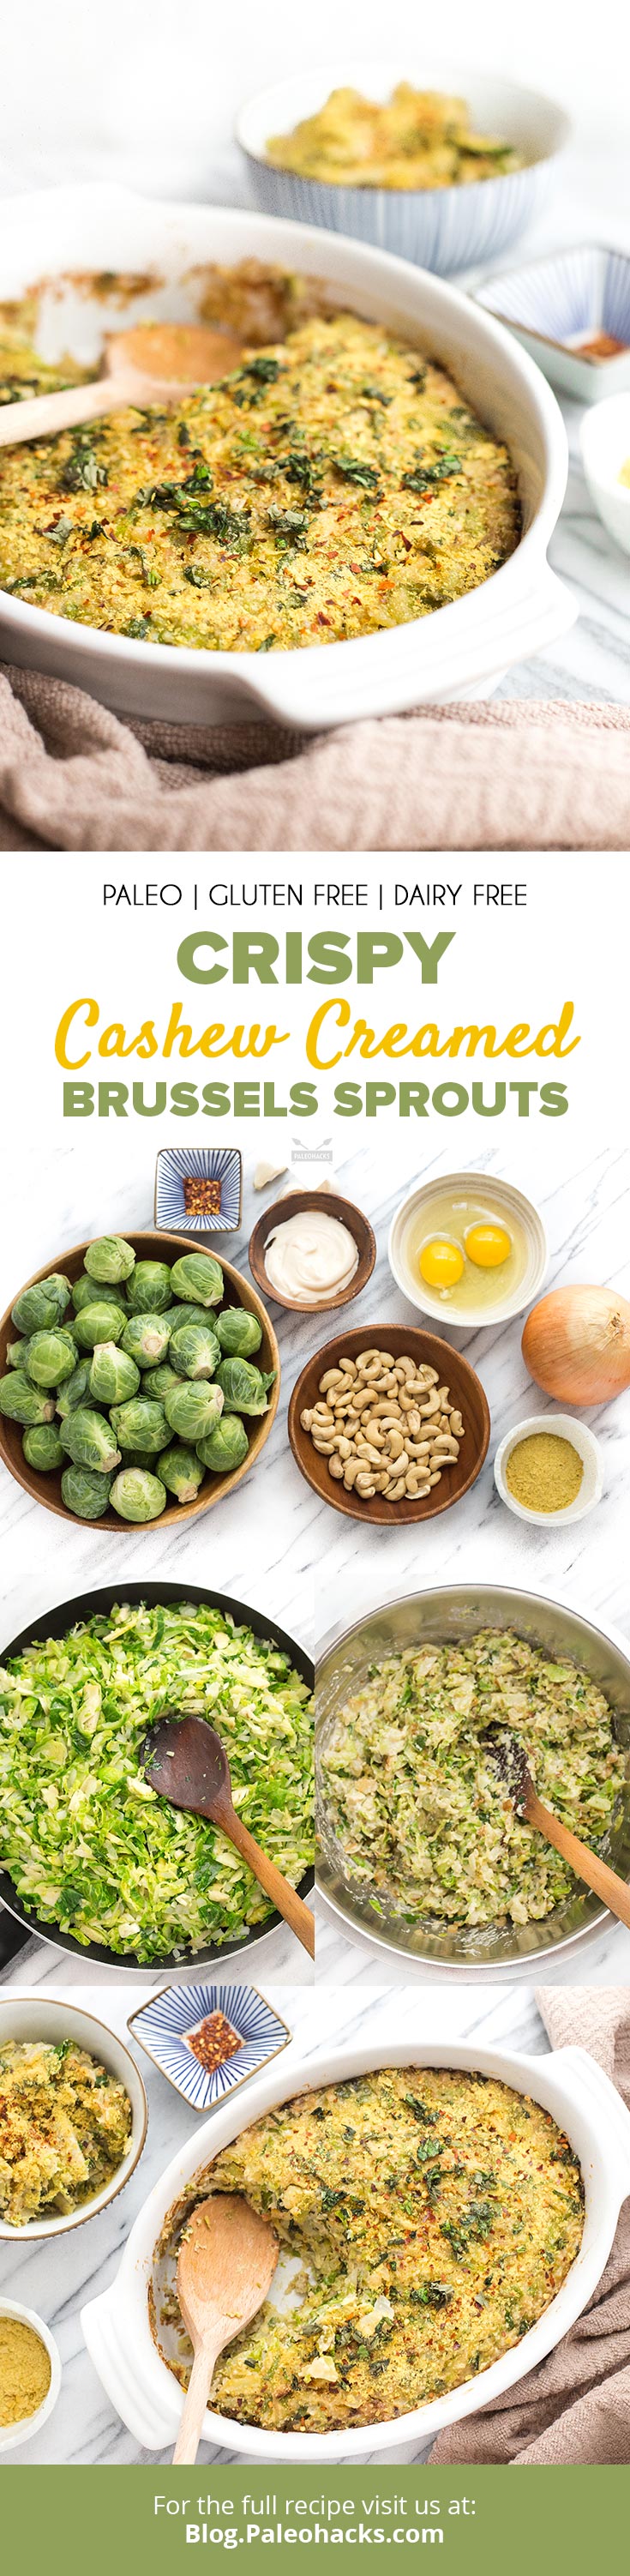 Smother your Brussels sprouts in “cheesy” cashew cream with fresh herbs and spices. Just when you thought roasted Brussel sprouts couldn't get any better!